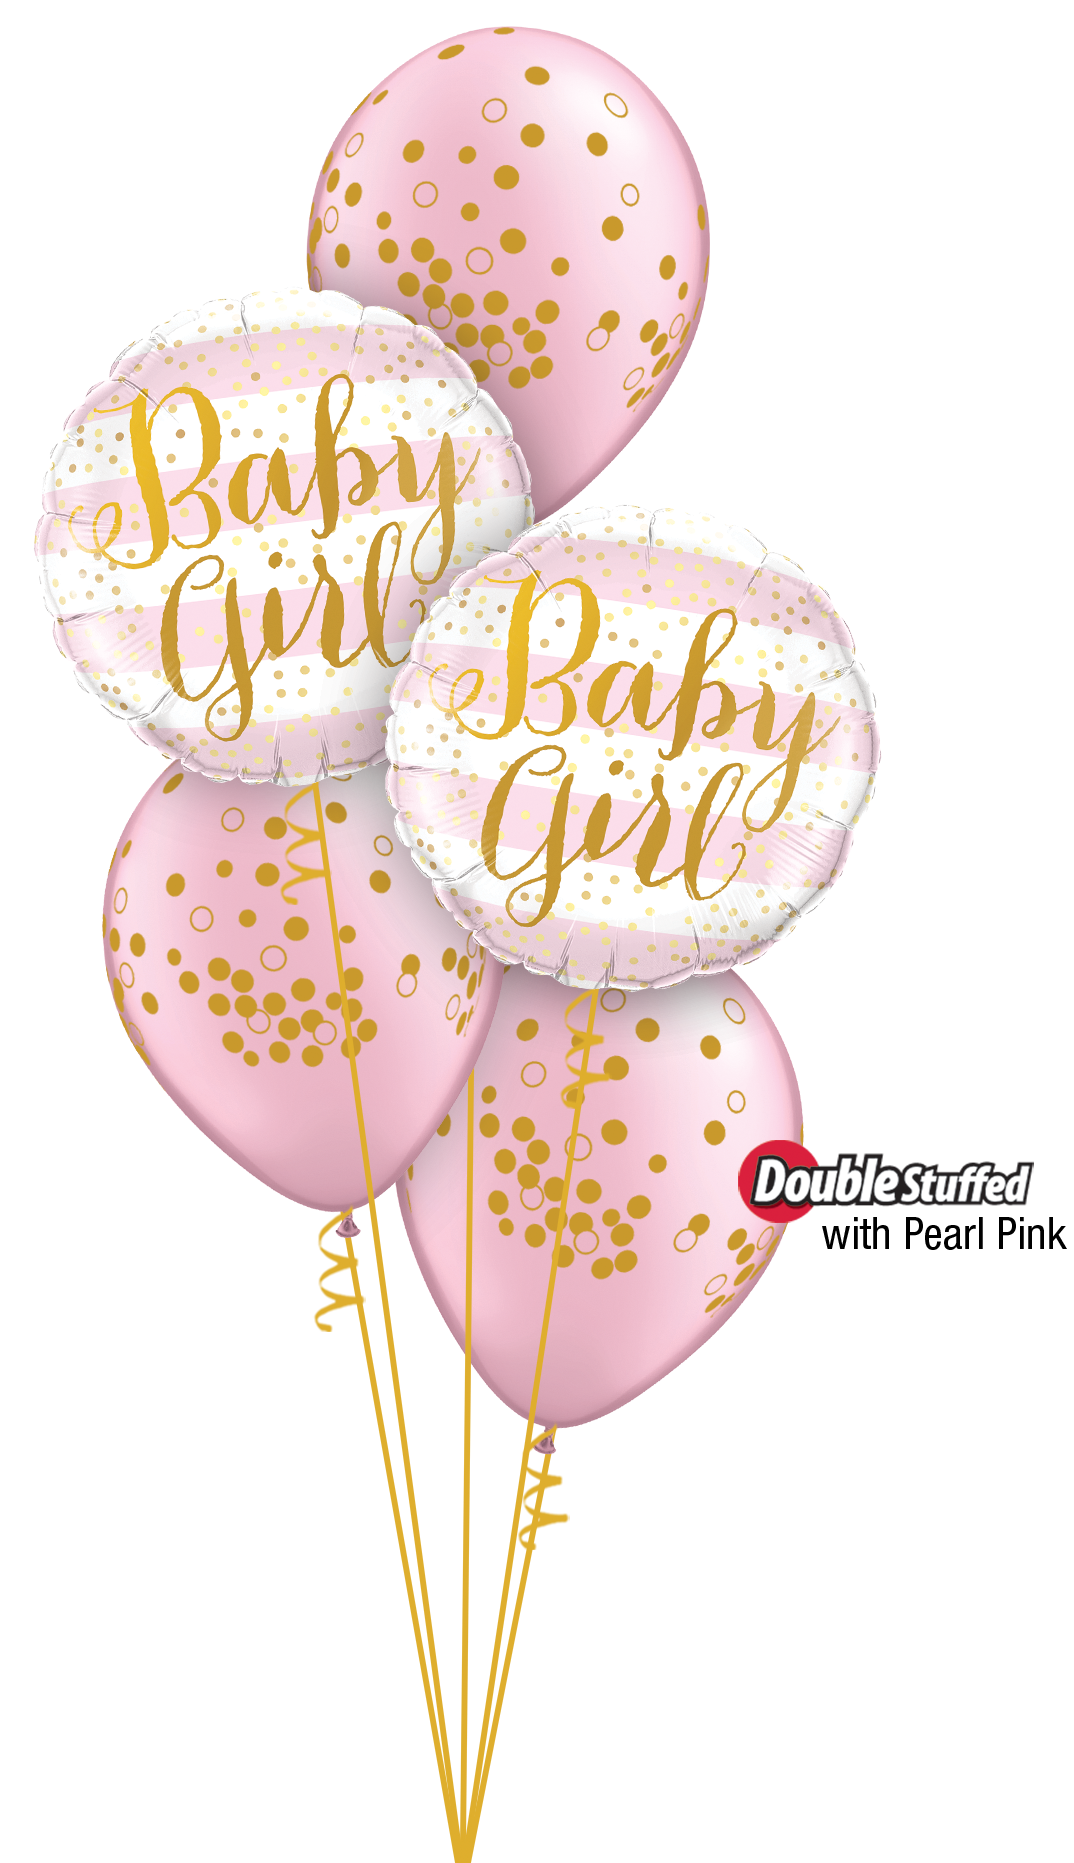 Pearl Pink Baby Confetti Dots